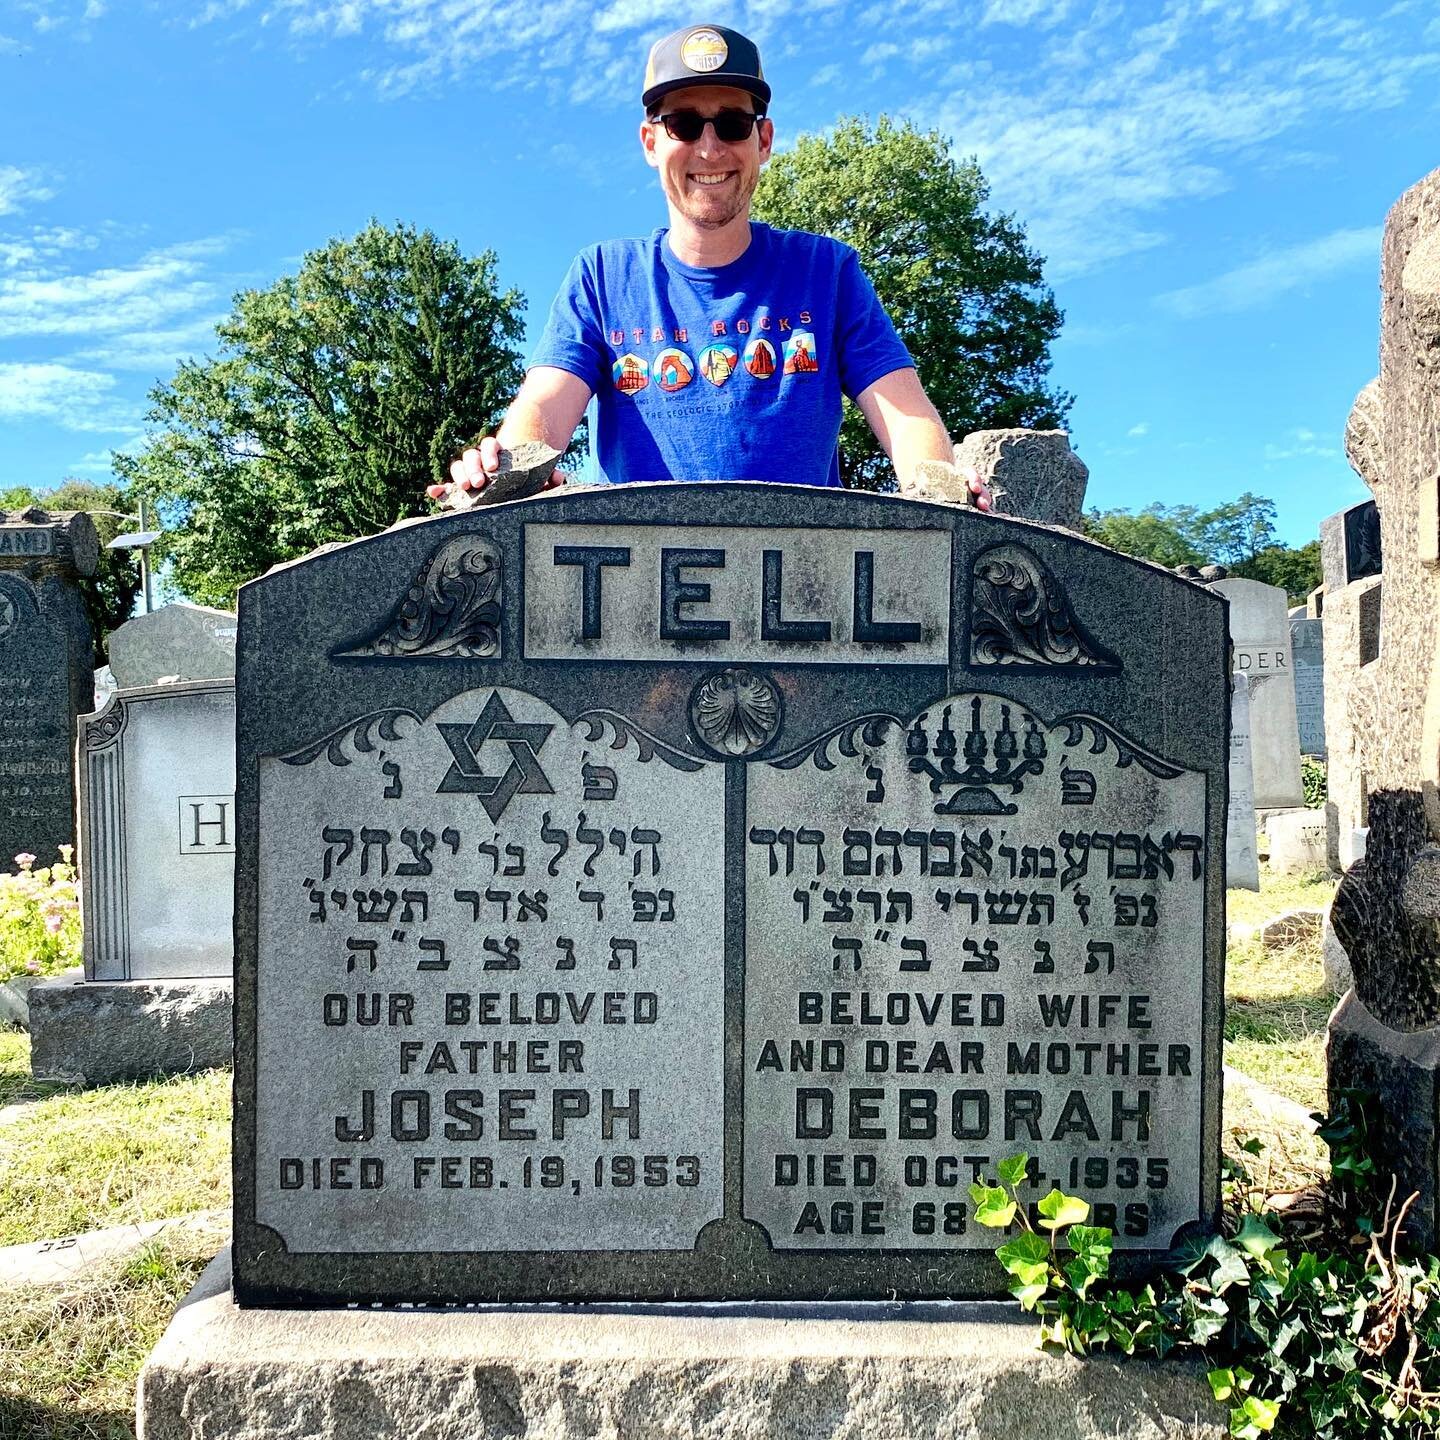 While in New Jersey to pay respects and handle affairs for @kzupp&rsquo;s father Ron Zupp who very sadly recently passed, we went on a second family quest to the afterlife...

My great-great grandfather Jospeh Tell and my great-great grandmother Debo